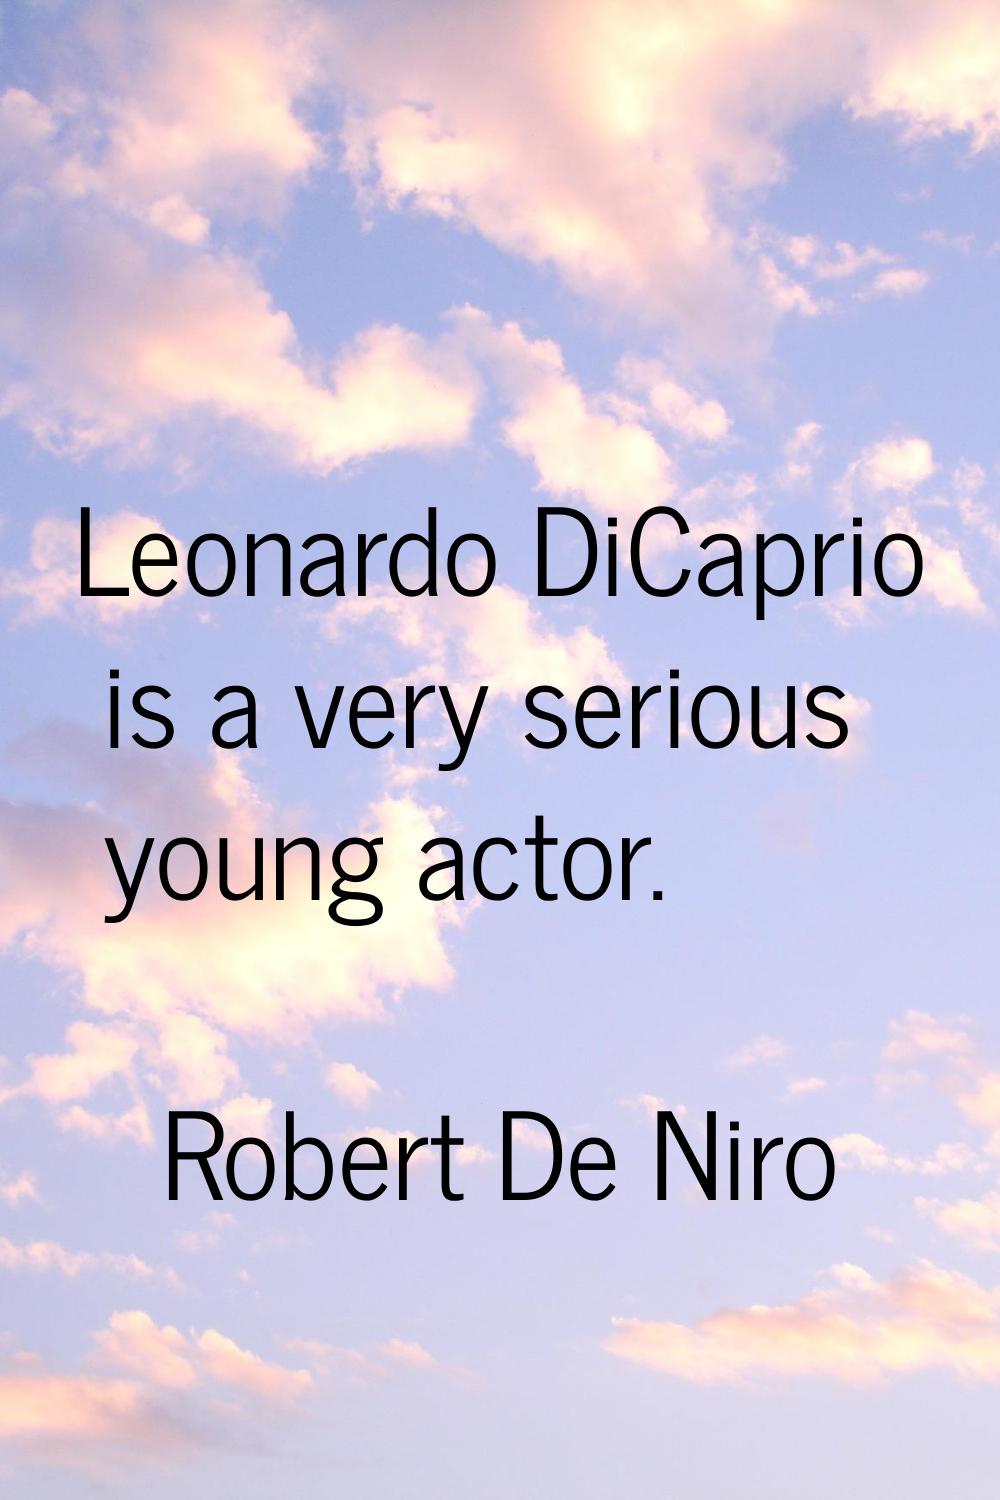 Leonardo DiCaprio is a very serious young actor.